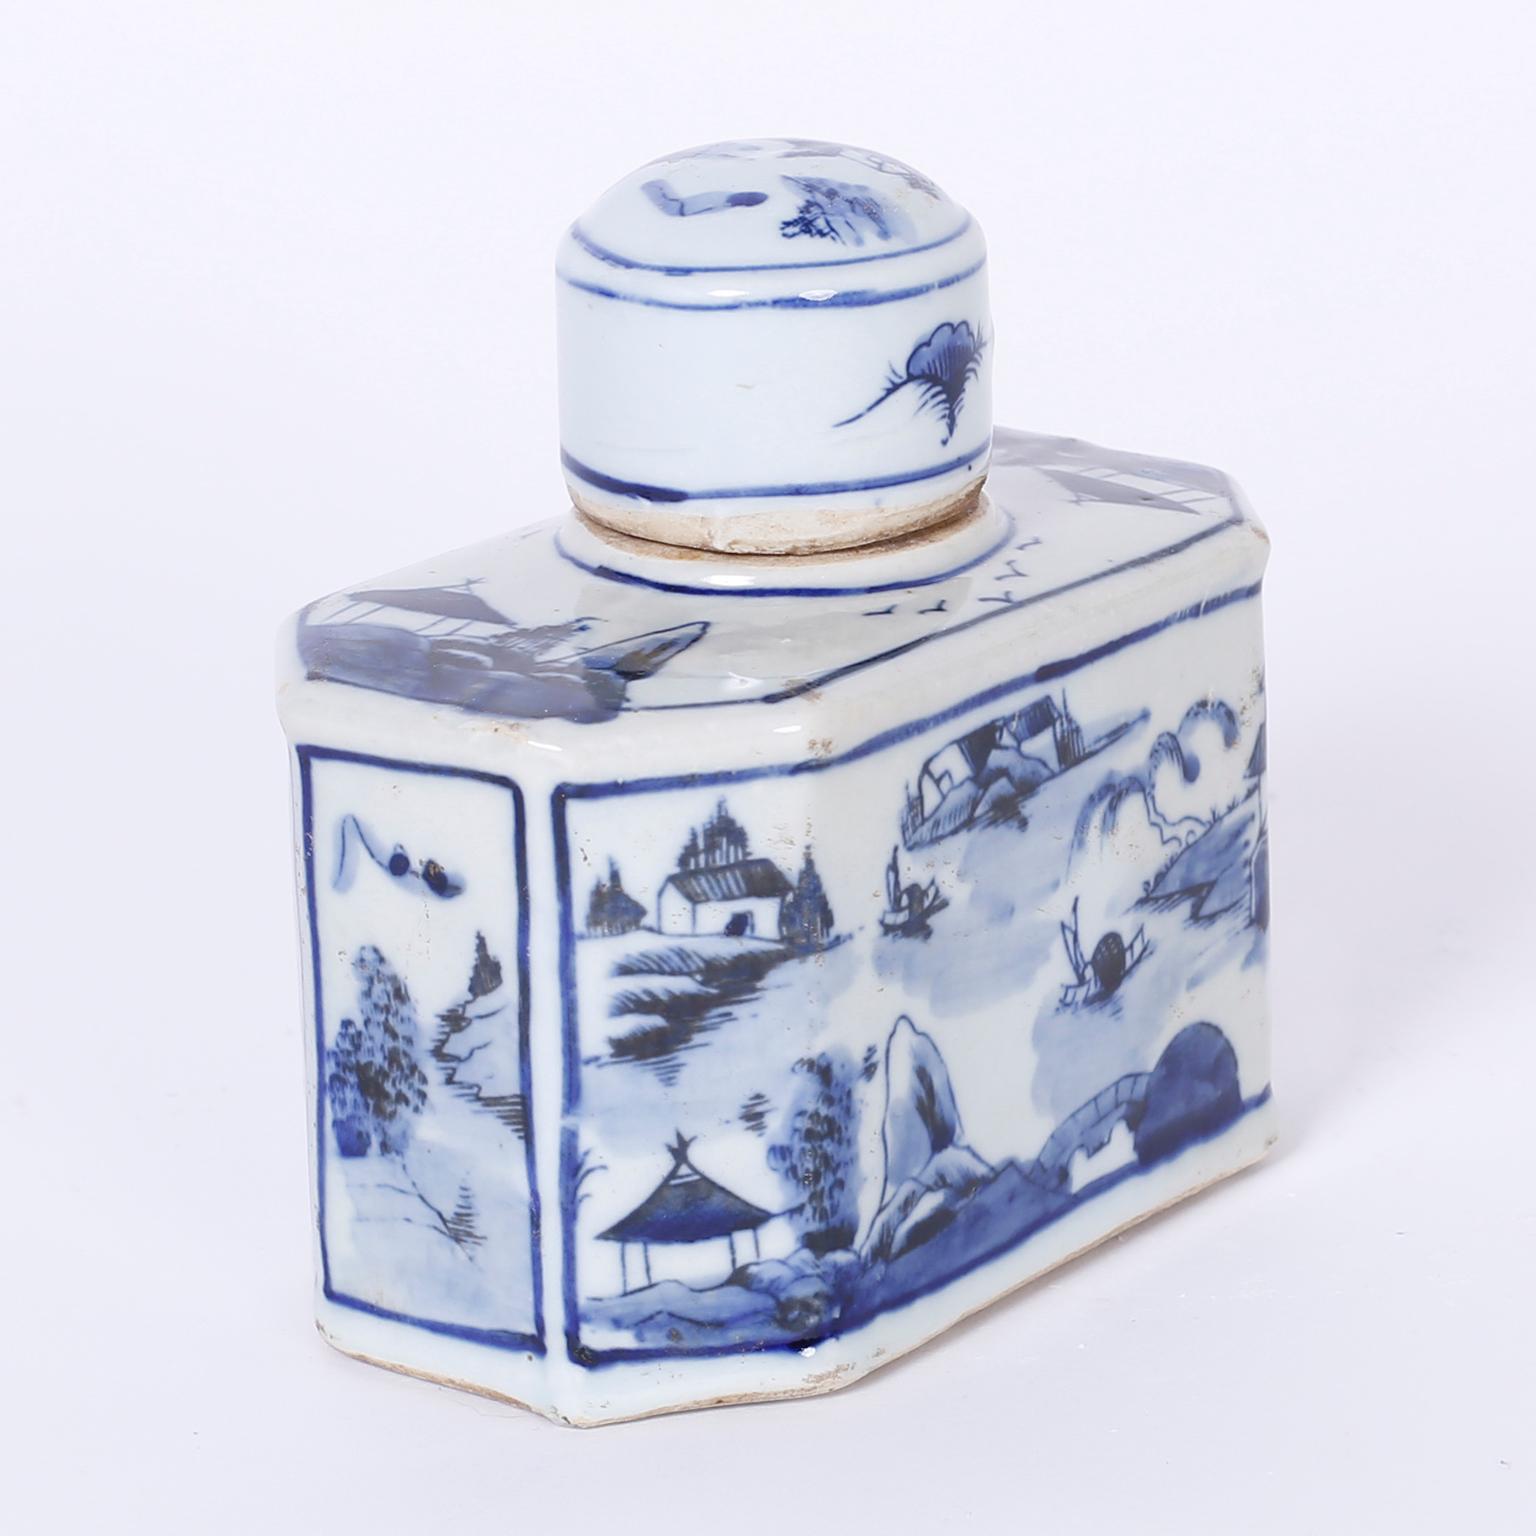 Intriguing pair of Chinese porcelain blue and white porcelain jars or bottles having an uncommon hexagon form, small fitted lids and decorated all around with Classic symbolic chinoiserie landscapes.